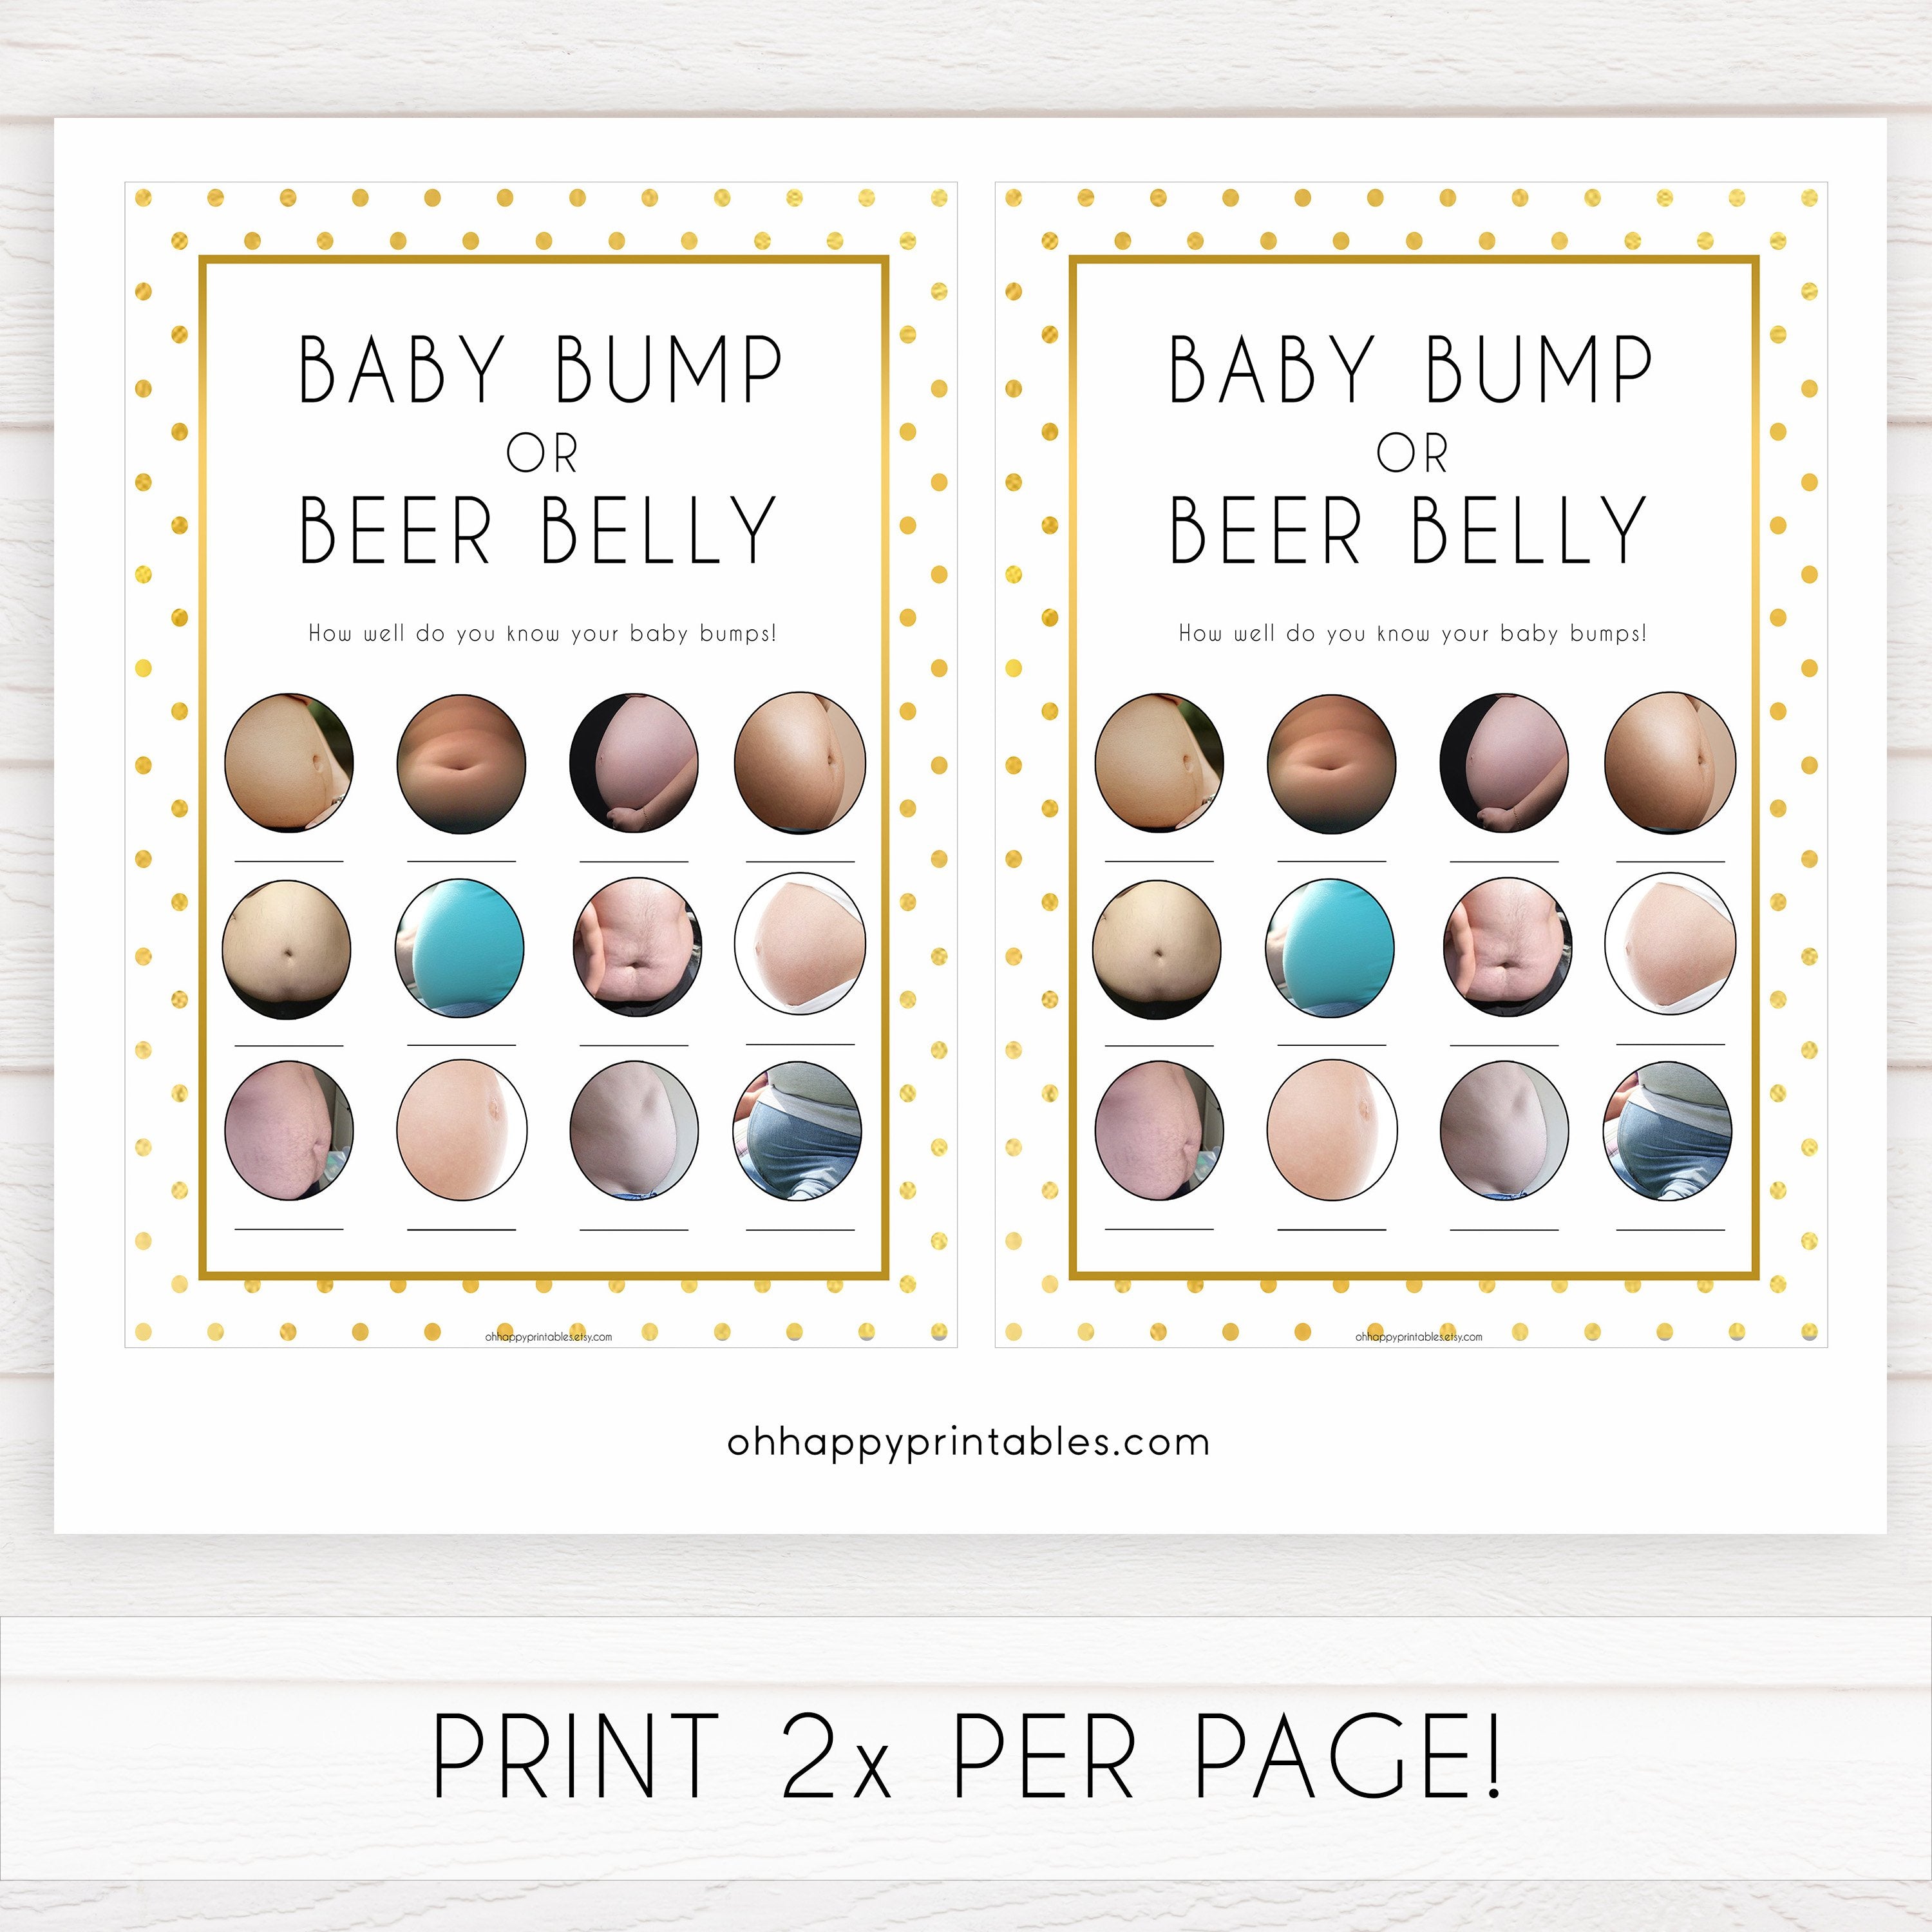 baby bump or beer belly game, Printable baby shower games, baby gold dots fun baby games, baby shower games, fun baby shower ideas, top baby shower ideas, gold glitter shower baby shower, friends baby shower ideas